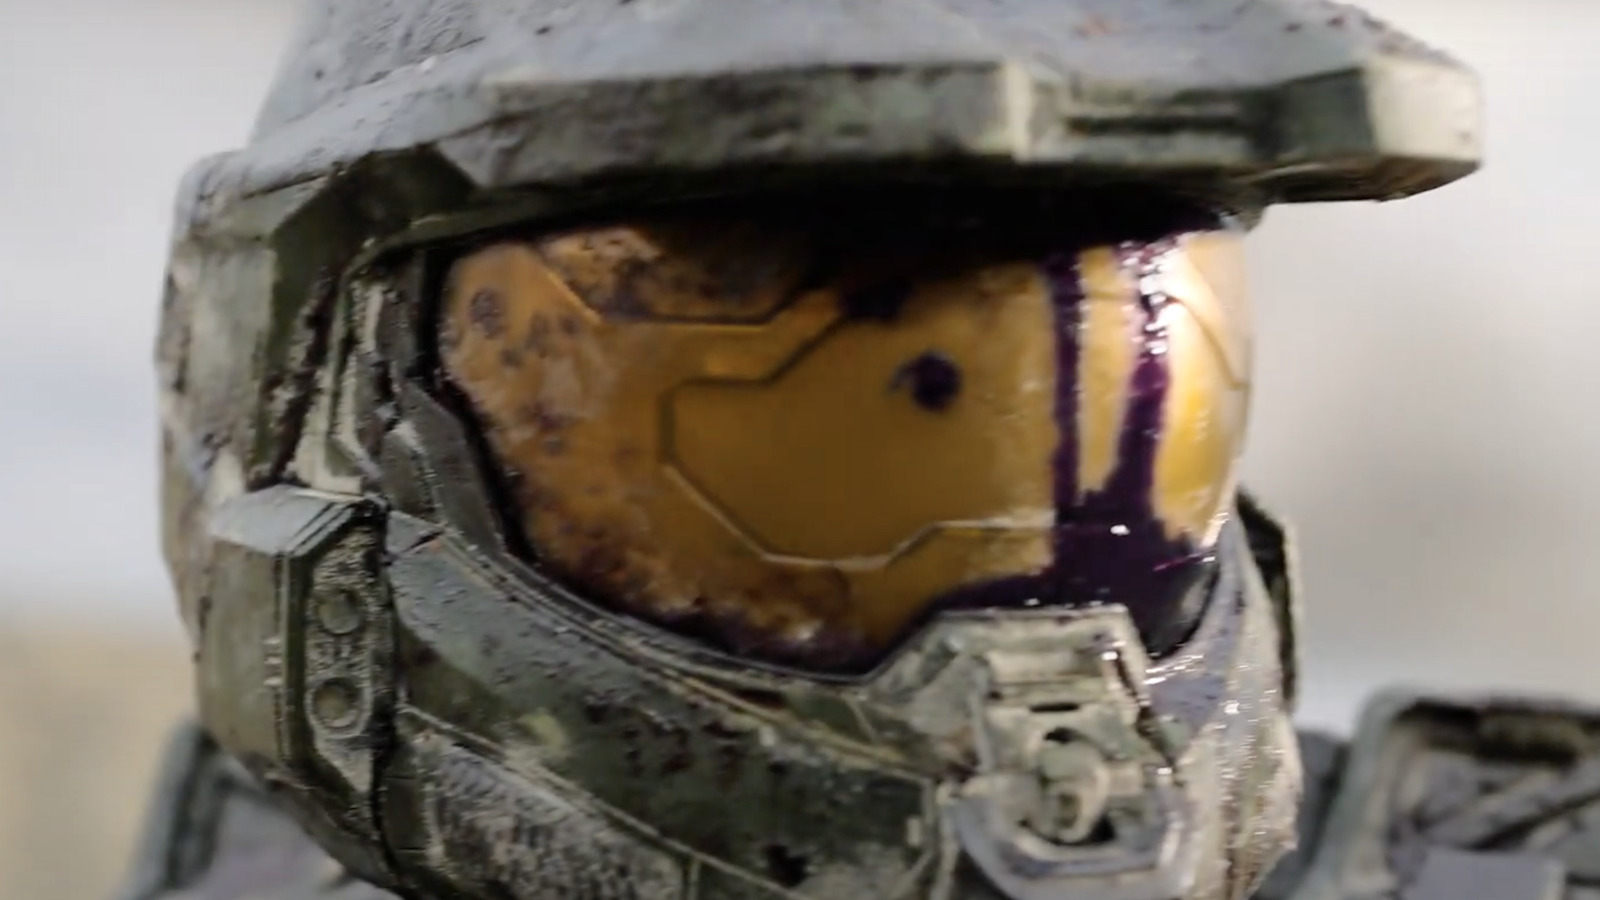 Halo' Live-Action Paramount+ Series Receives First Teaser Trailer